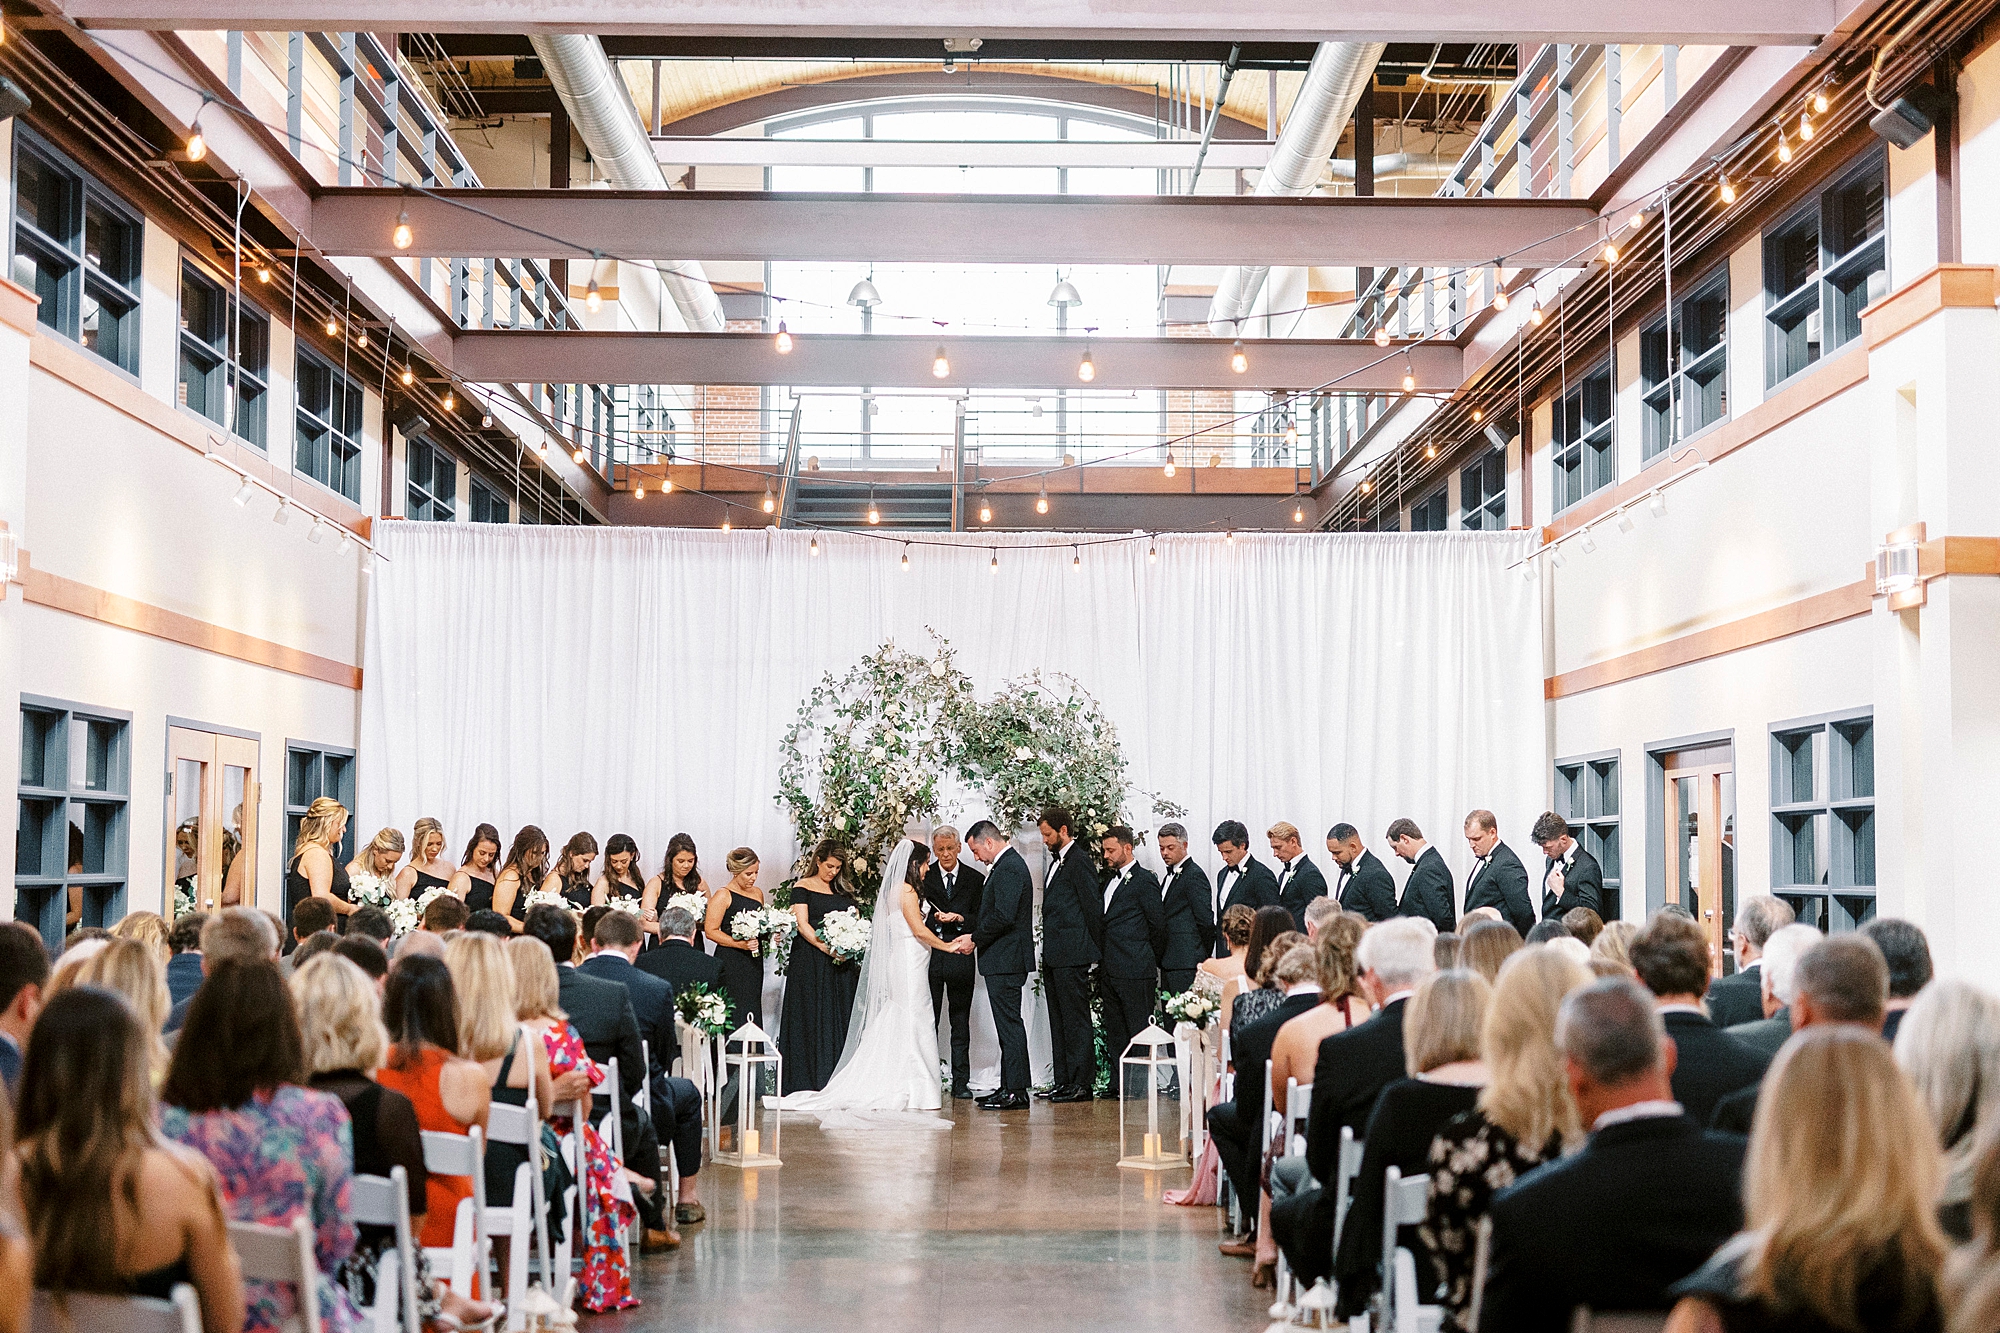 Design Atrium wedding ceremony for couple with wedding party in all black attire